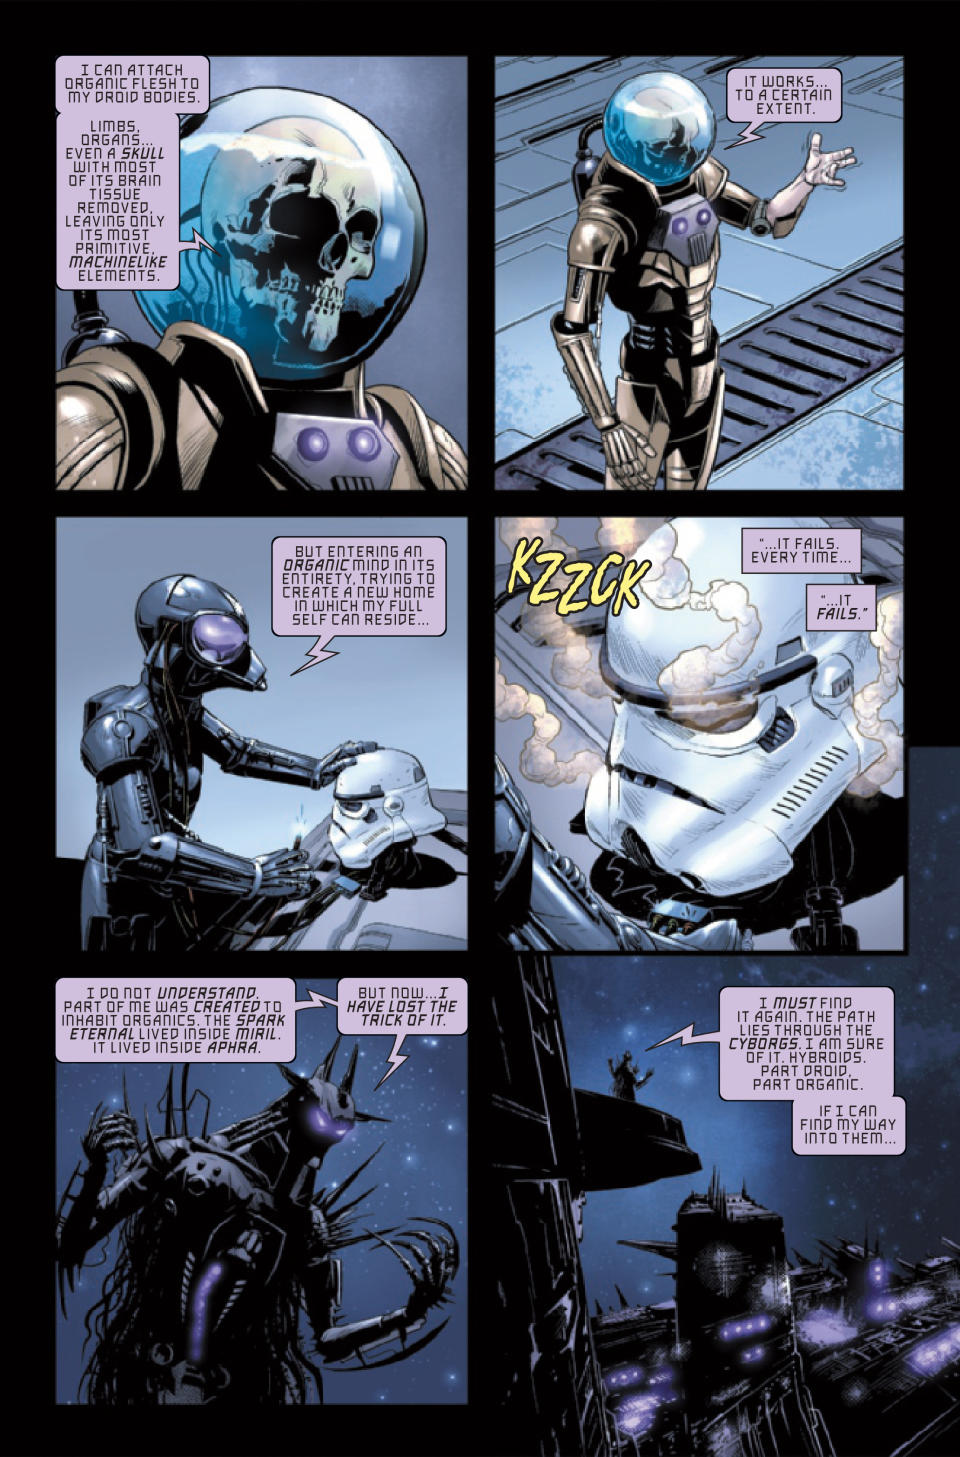 Pages from Dark Droids #3